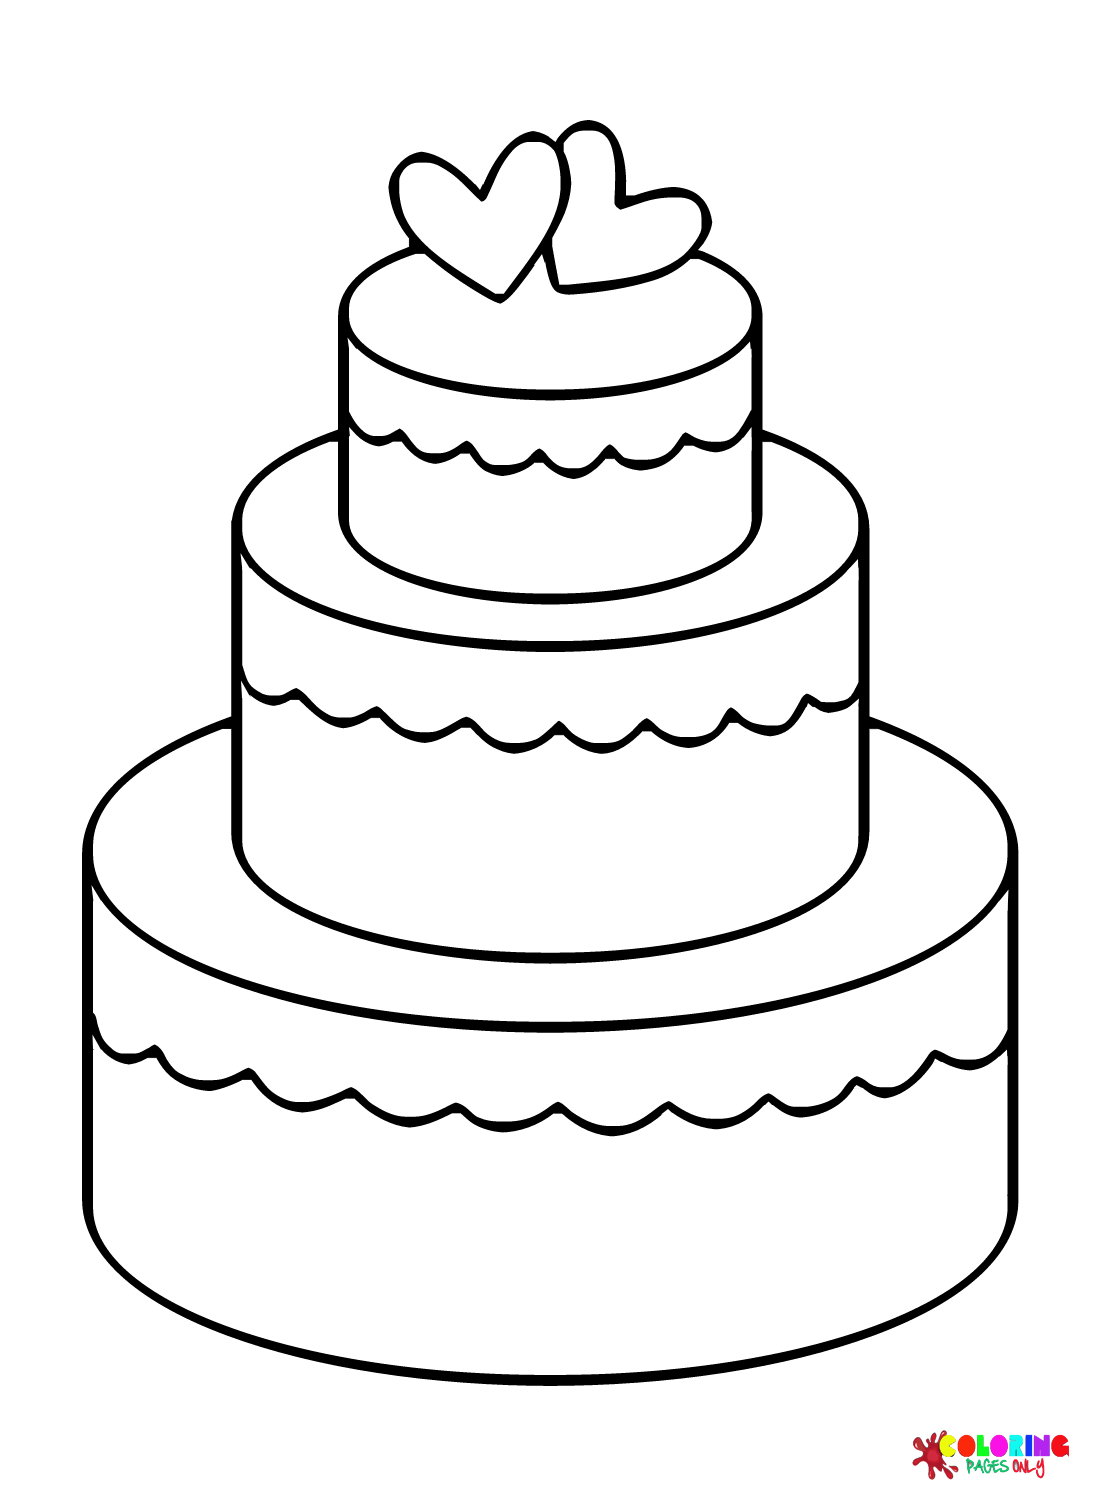 Draw Easy Wedding Cake Coloring Page